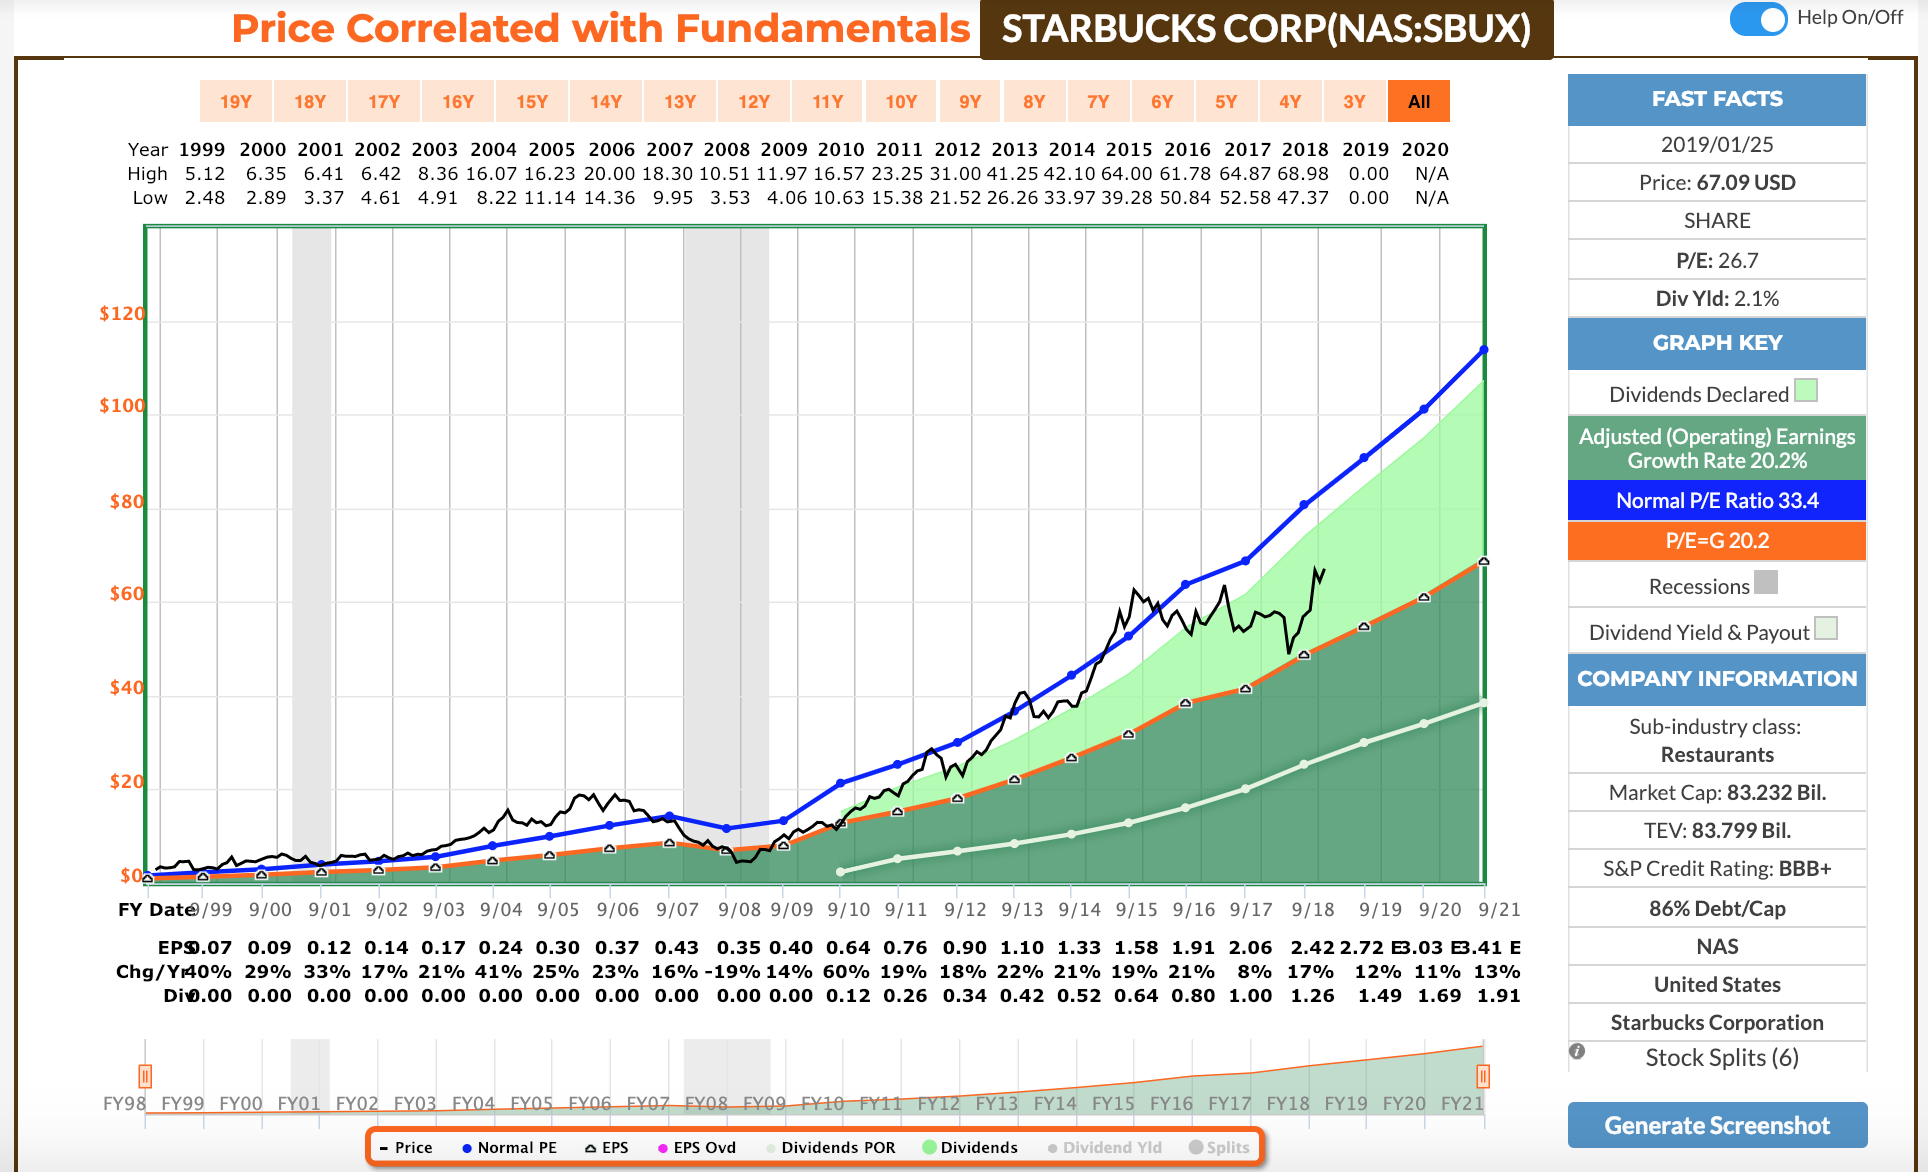 How Much Dividend Does Starbucks Pay